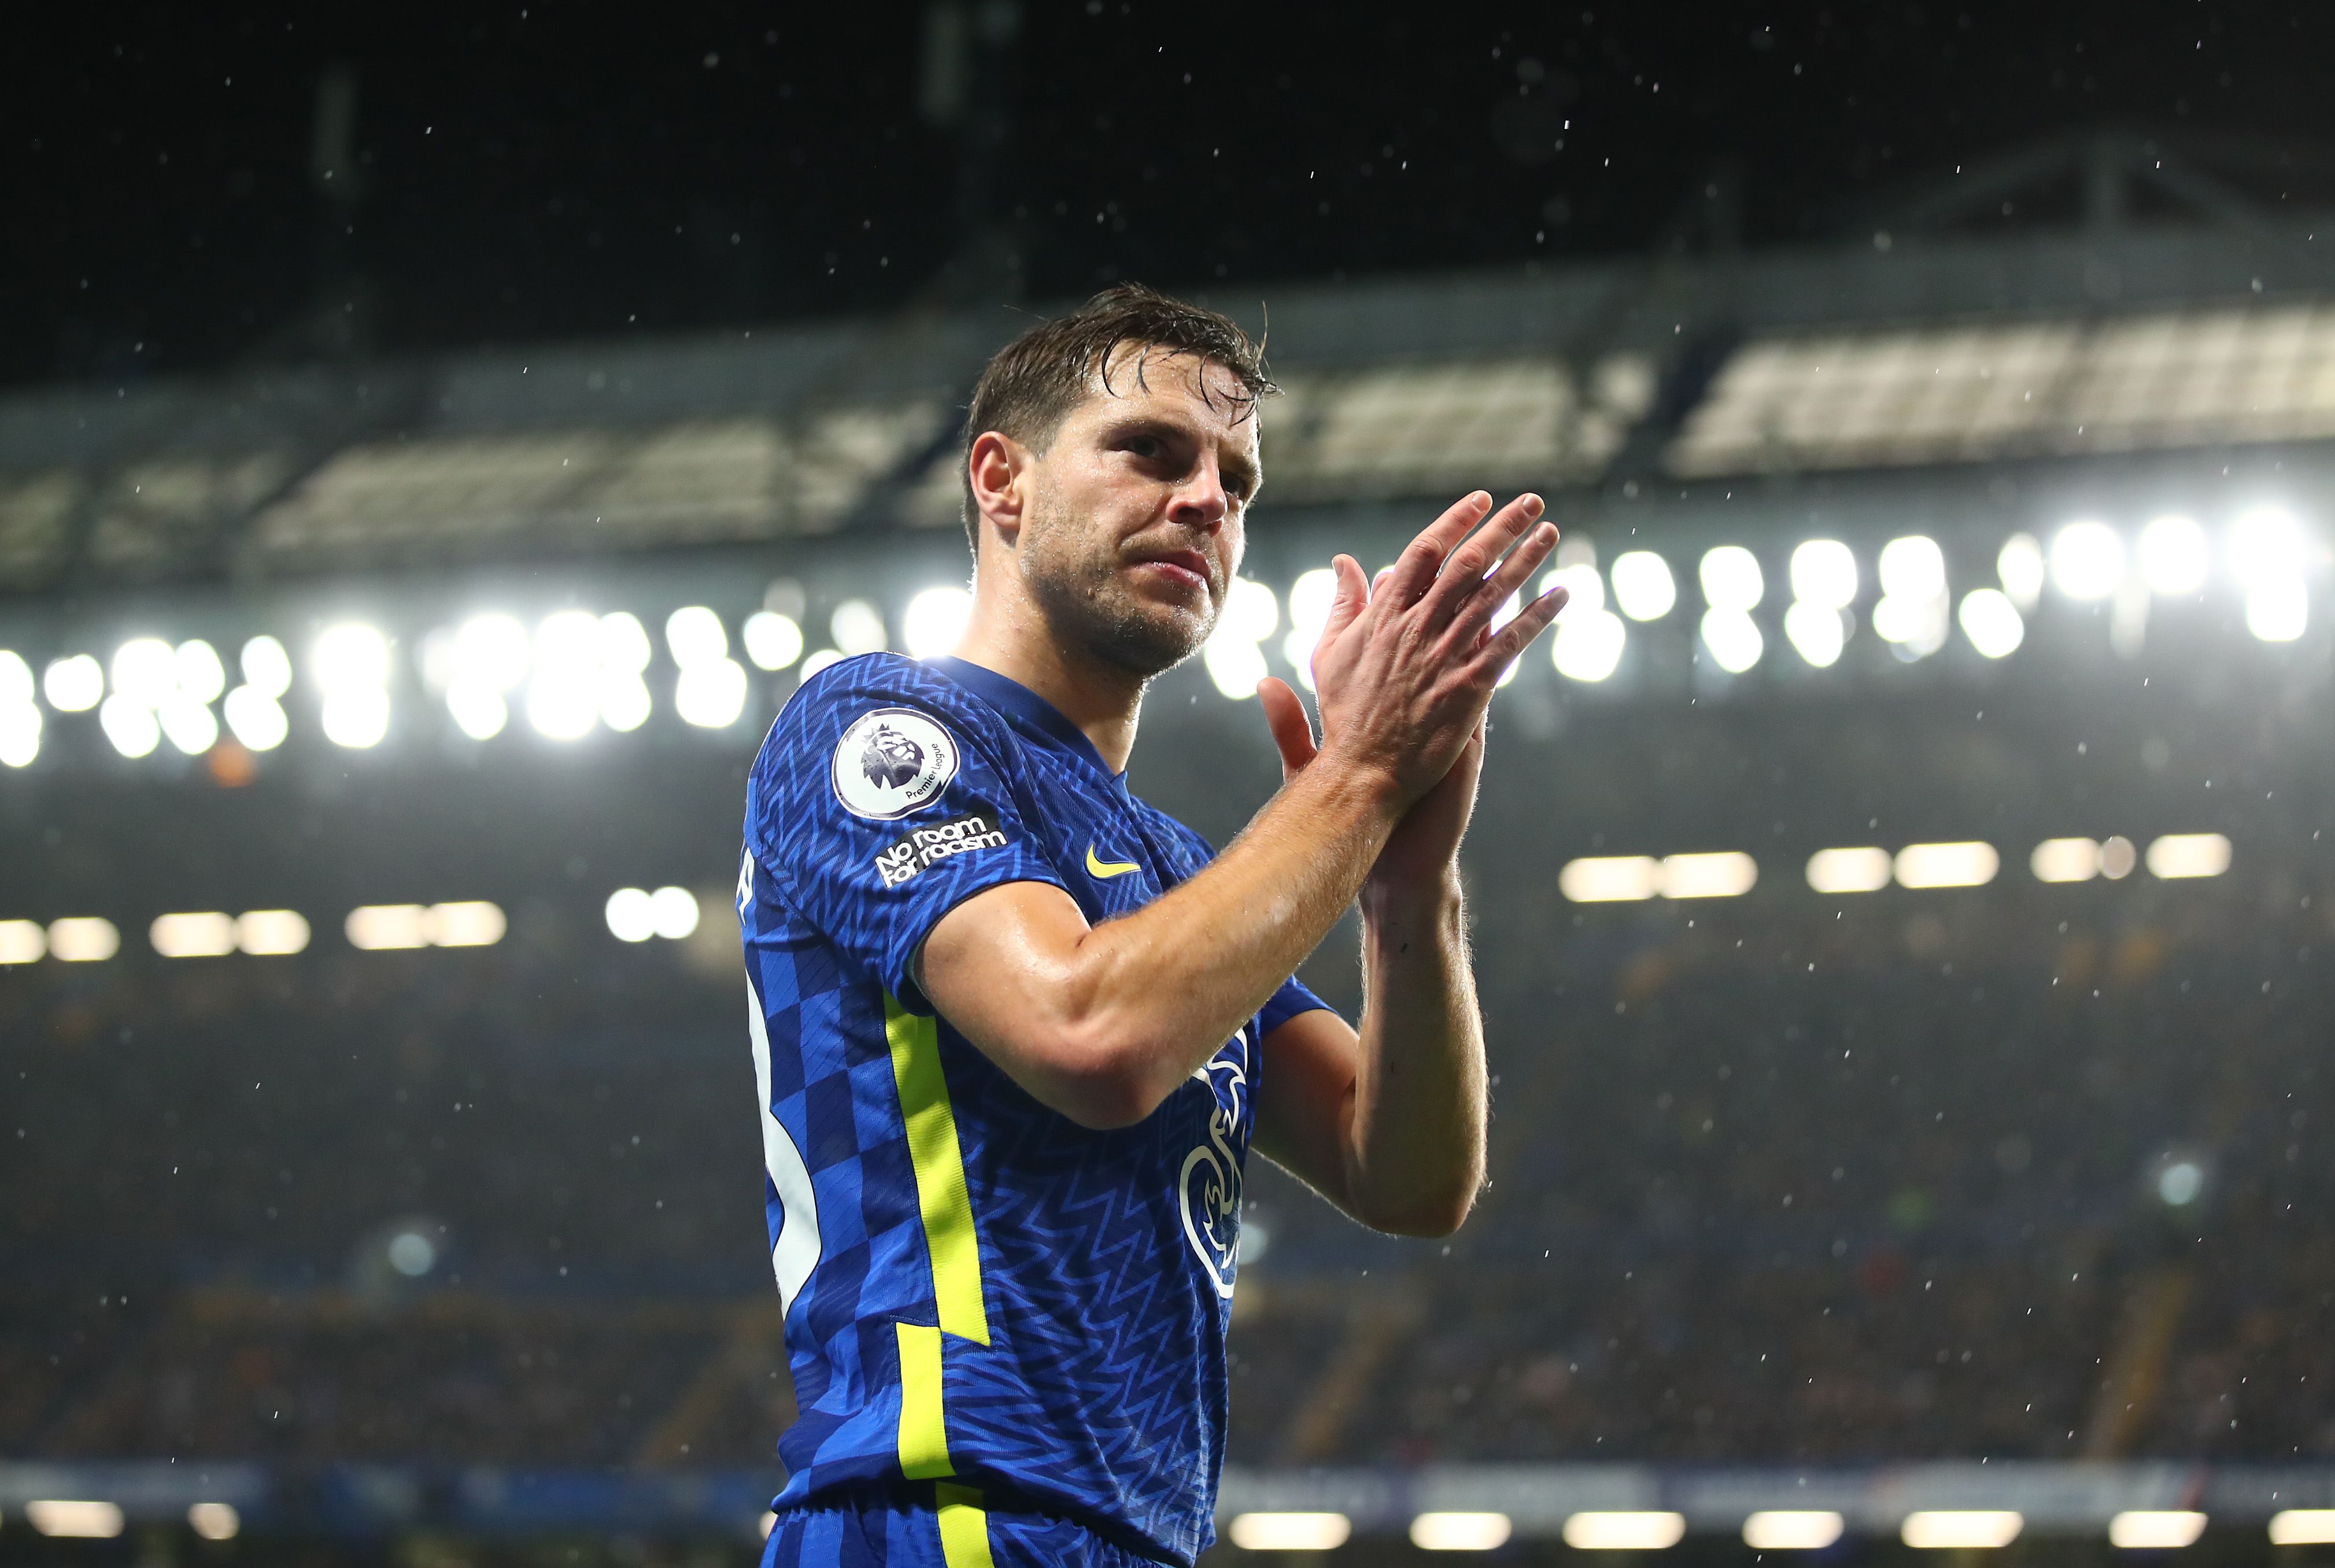 Video): Cesar Azpilicueta on his ten years at Chelsea - and trying to  finish his trophy jigsaw » Chelsea News